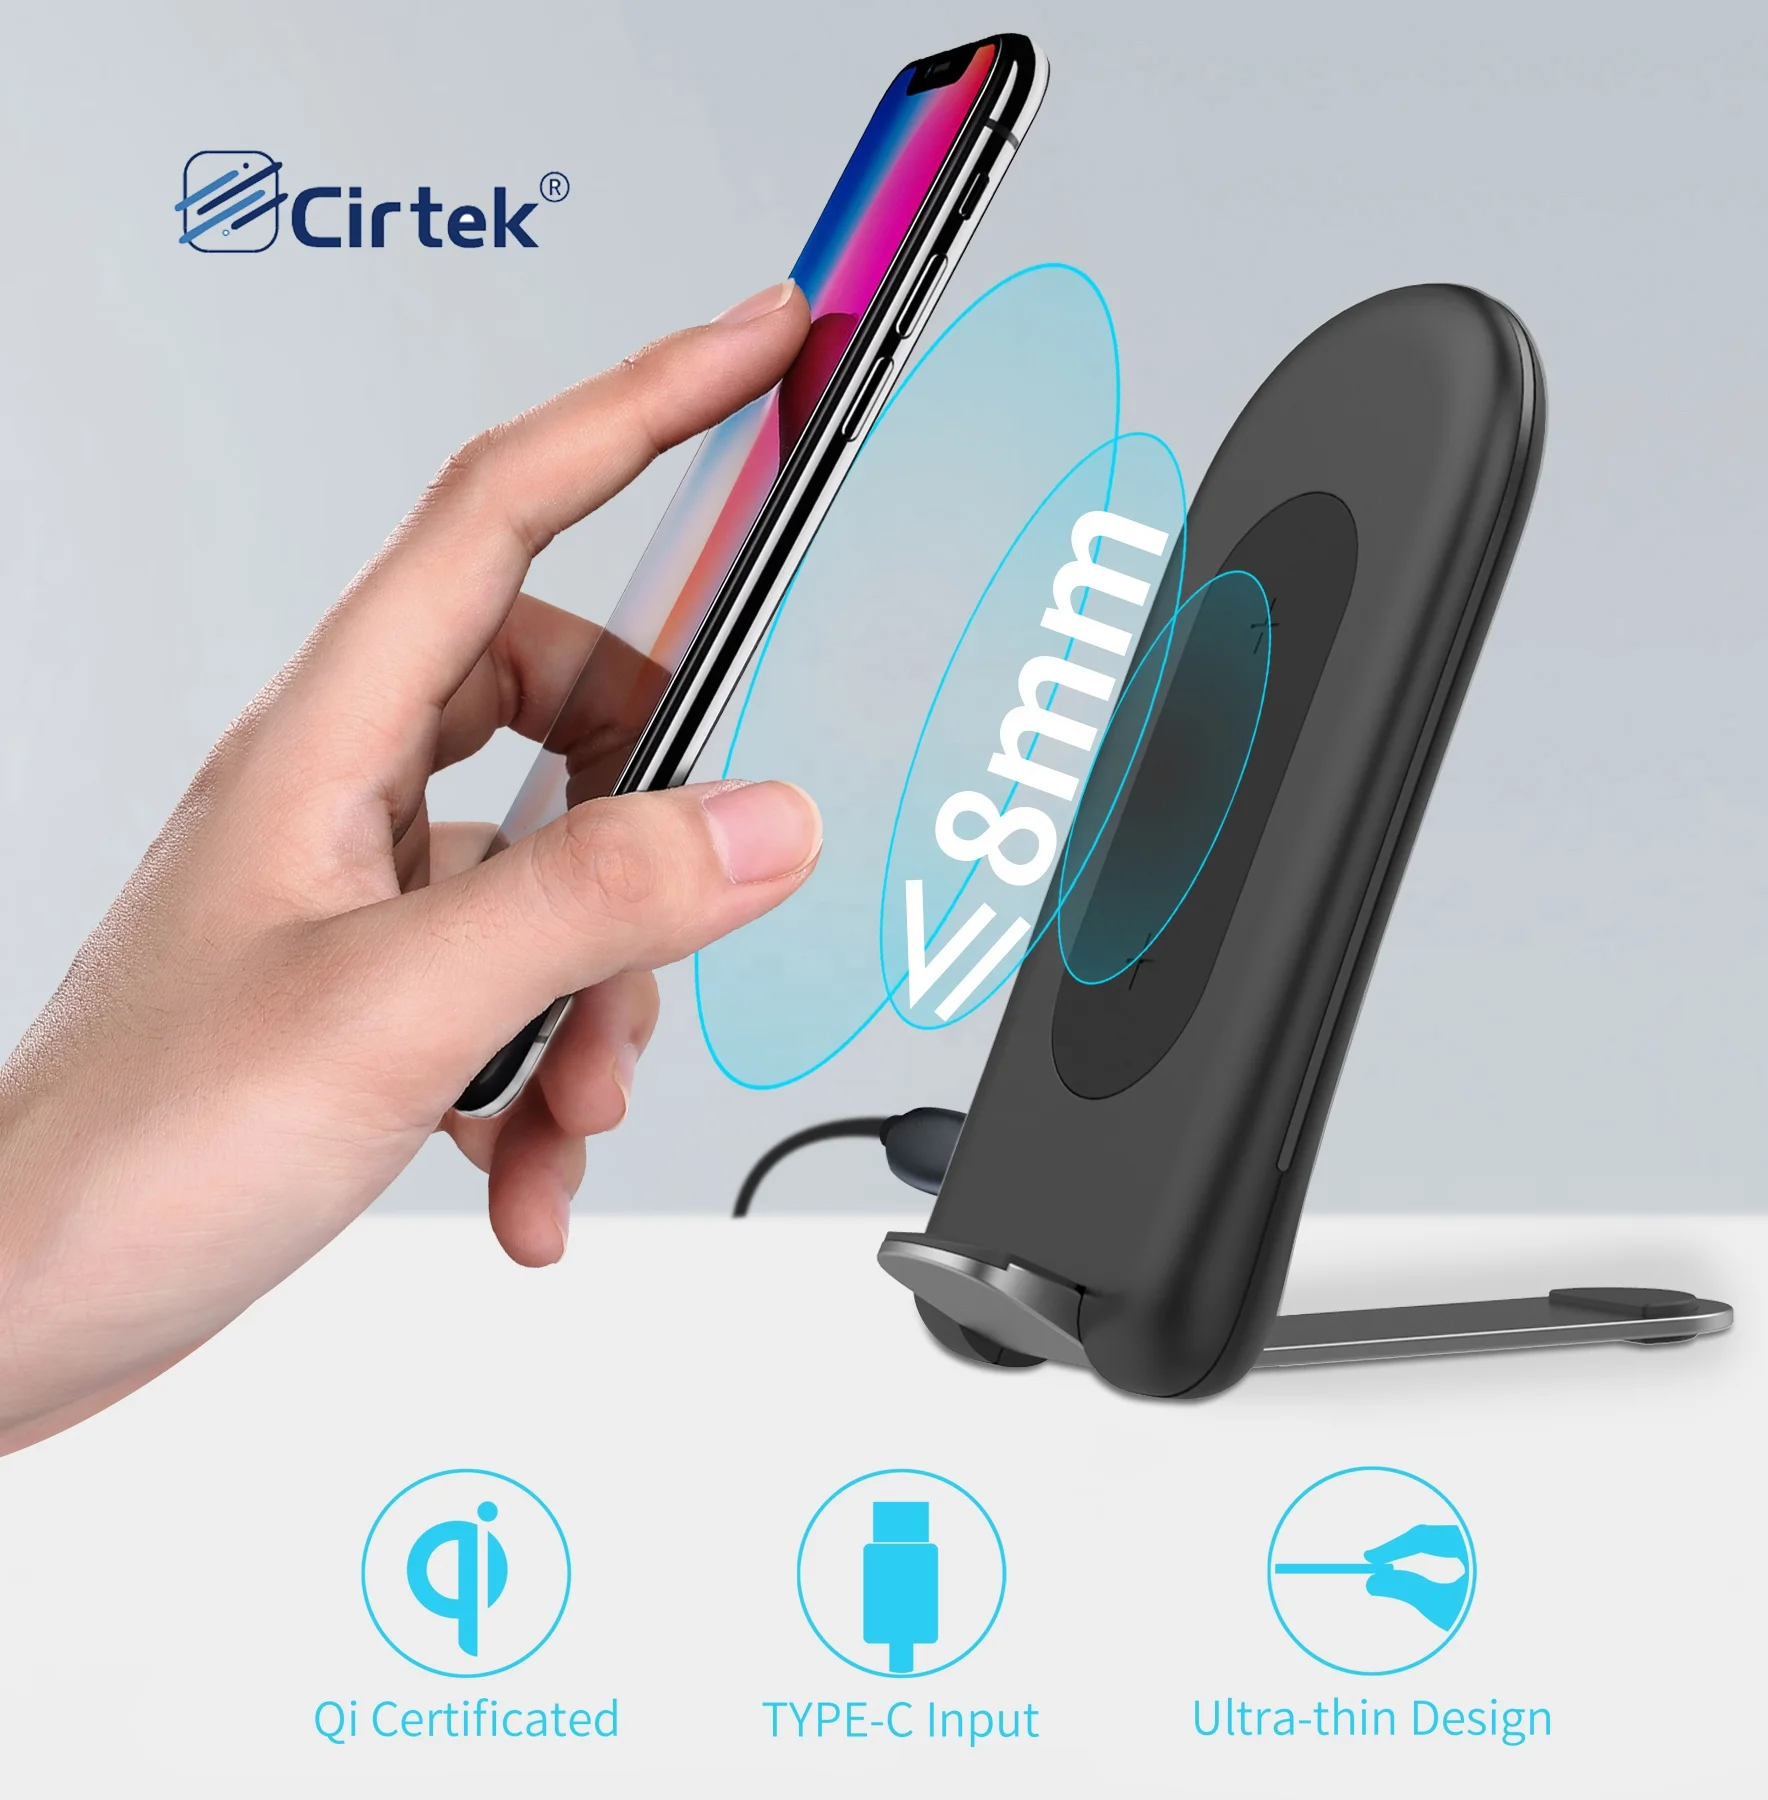 

Cirtek 2021fantasy foldable 15w phone wireless charger universal compatible quick charge qi foldable wireless cell phone charger, Black